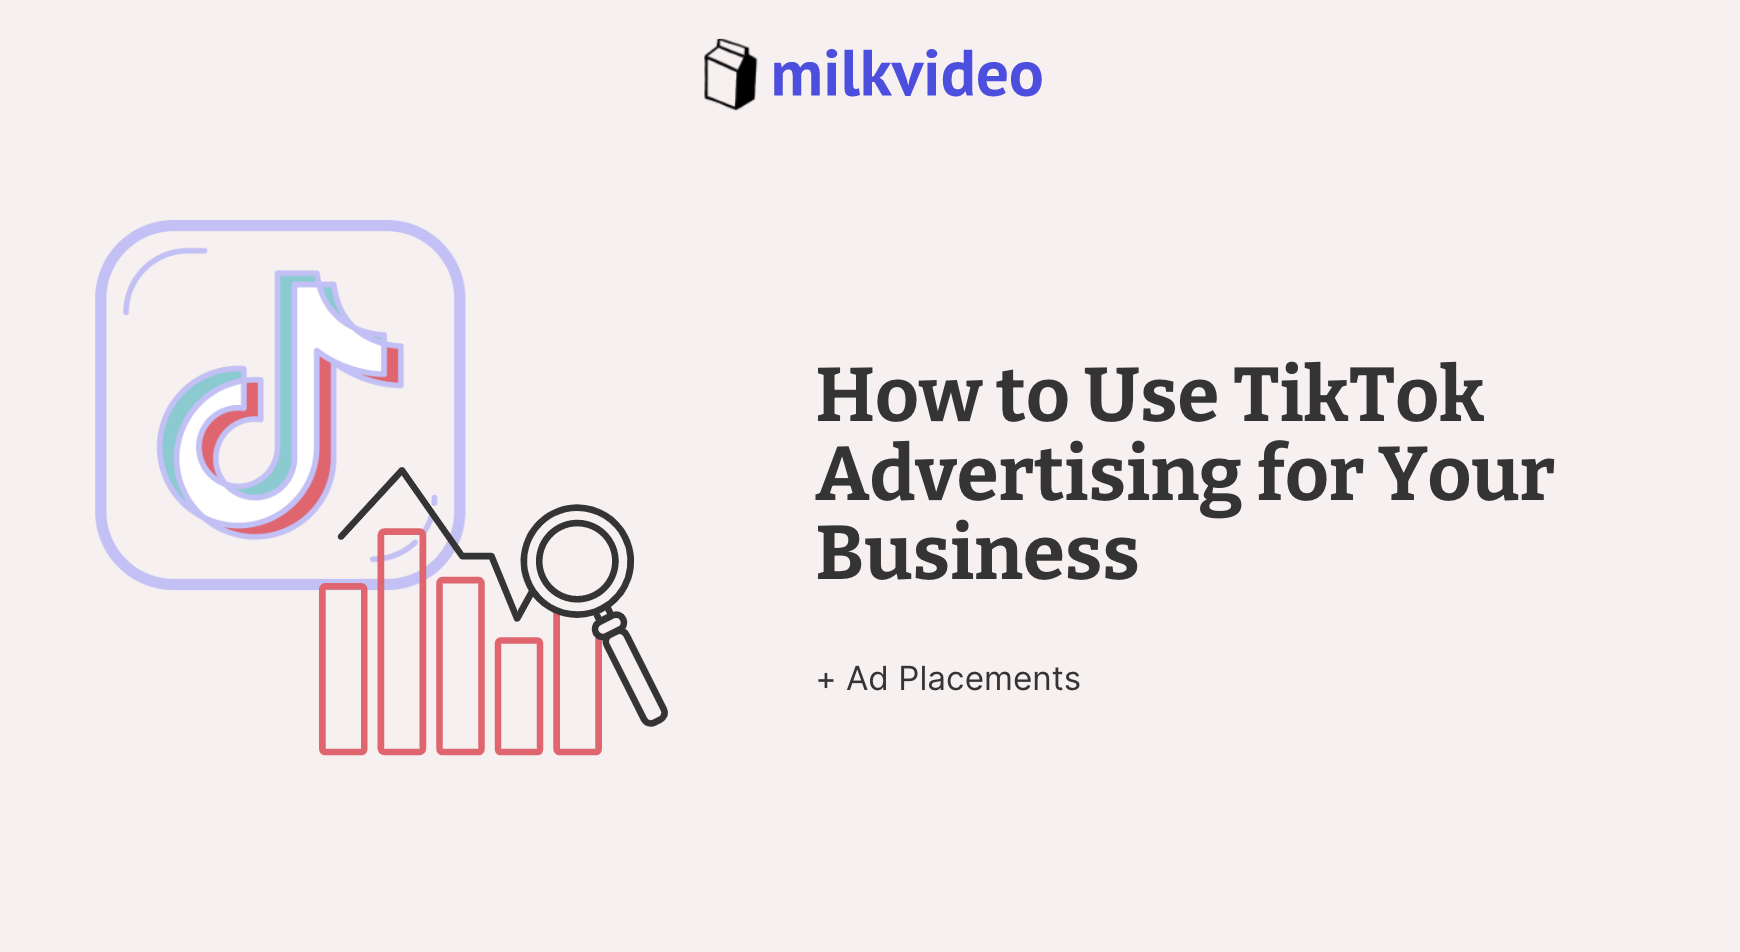 How to Use TikTok Advertising for Your Business